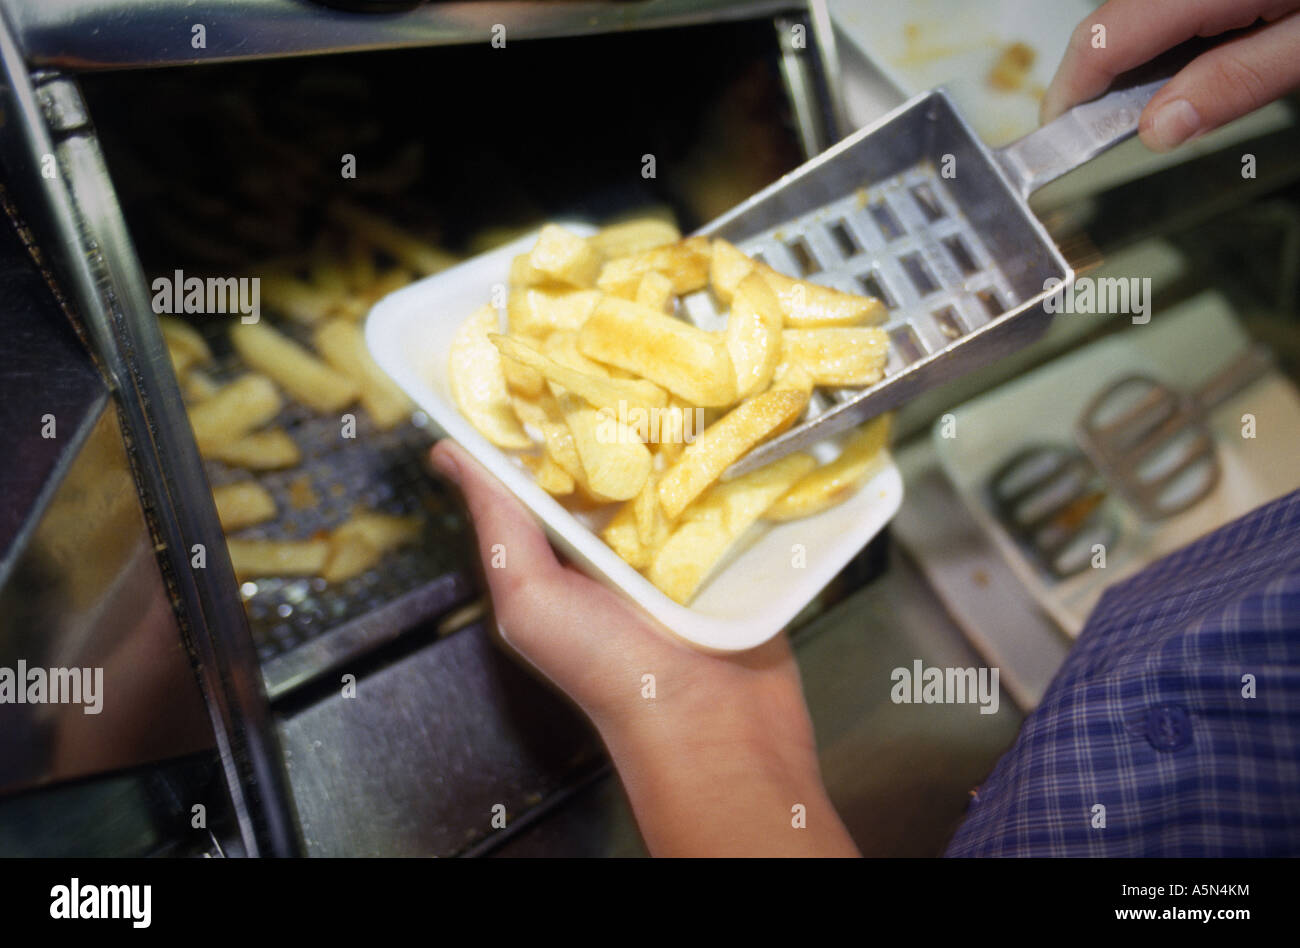 a portion of chips Stock Photo